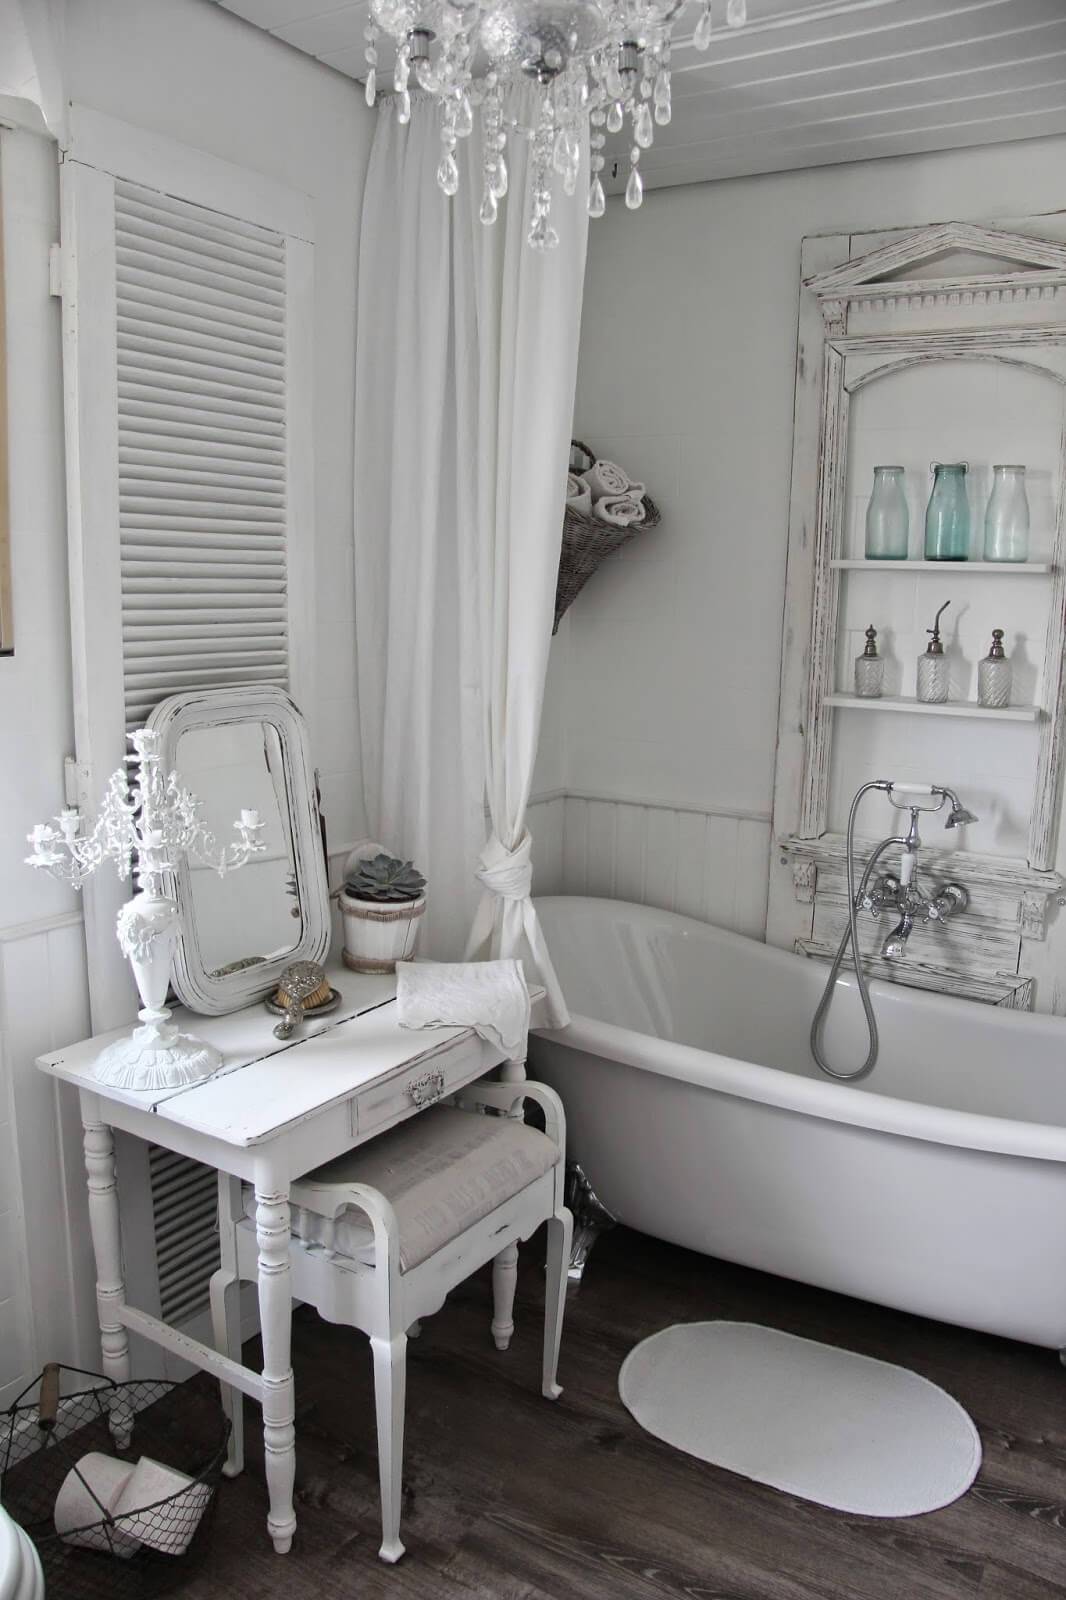 clawfoot antique tub in country chic bathroom with white shutter chandelier crystal vanity with mirror and old architecture turned shelving